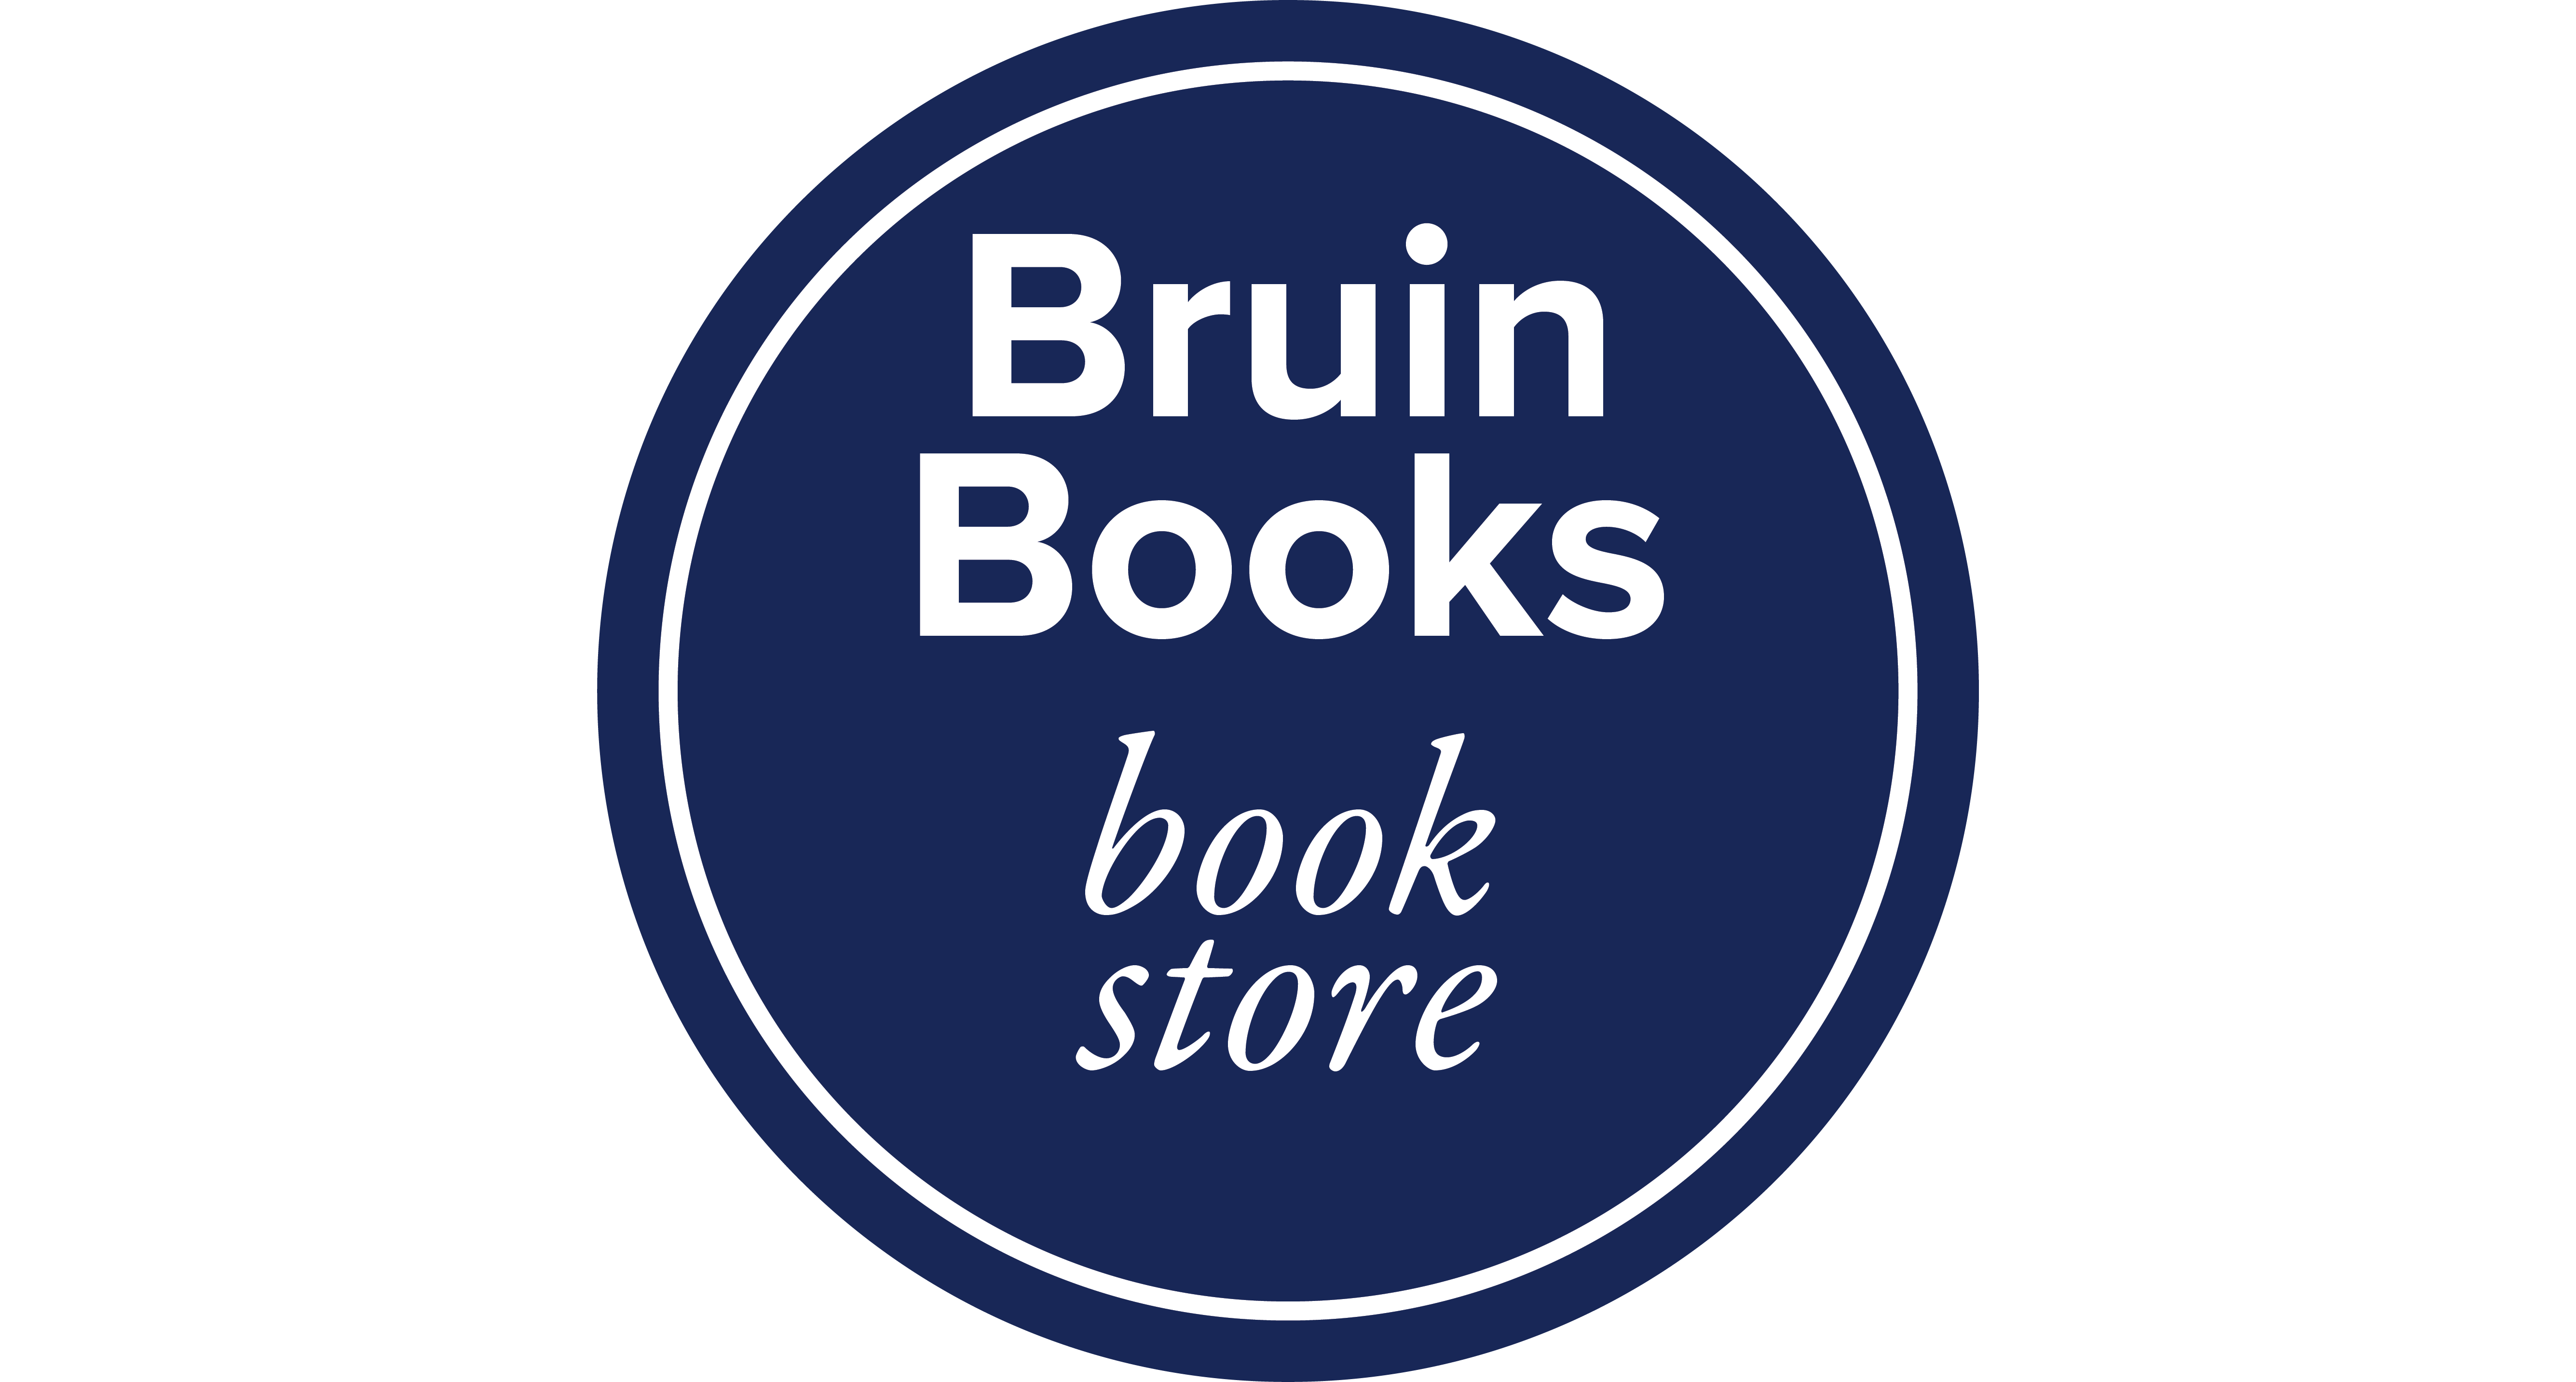 Click here to navigate to the BruinBooks home page